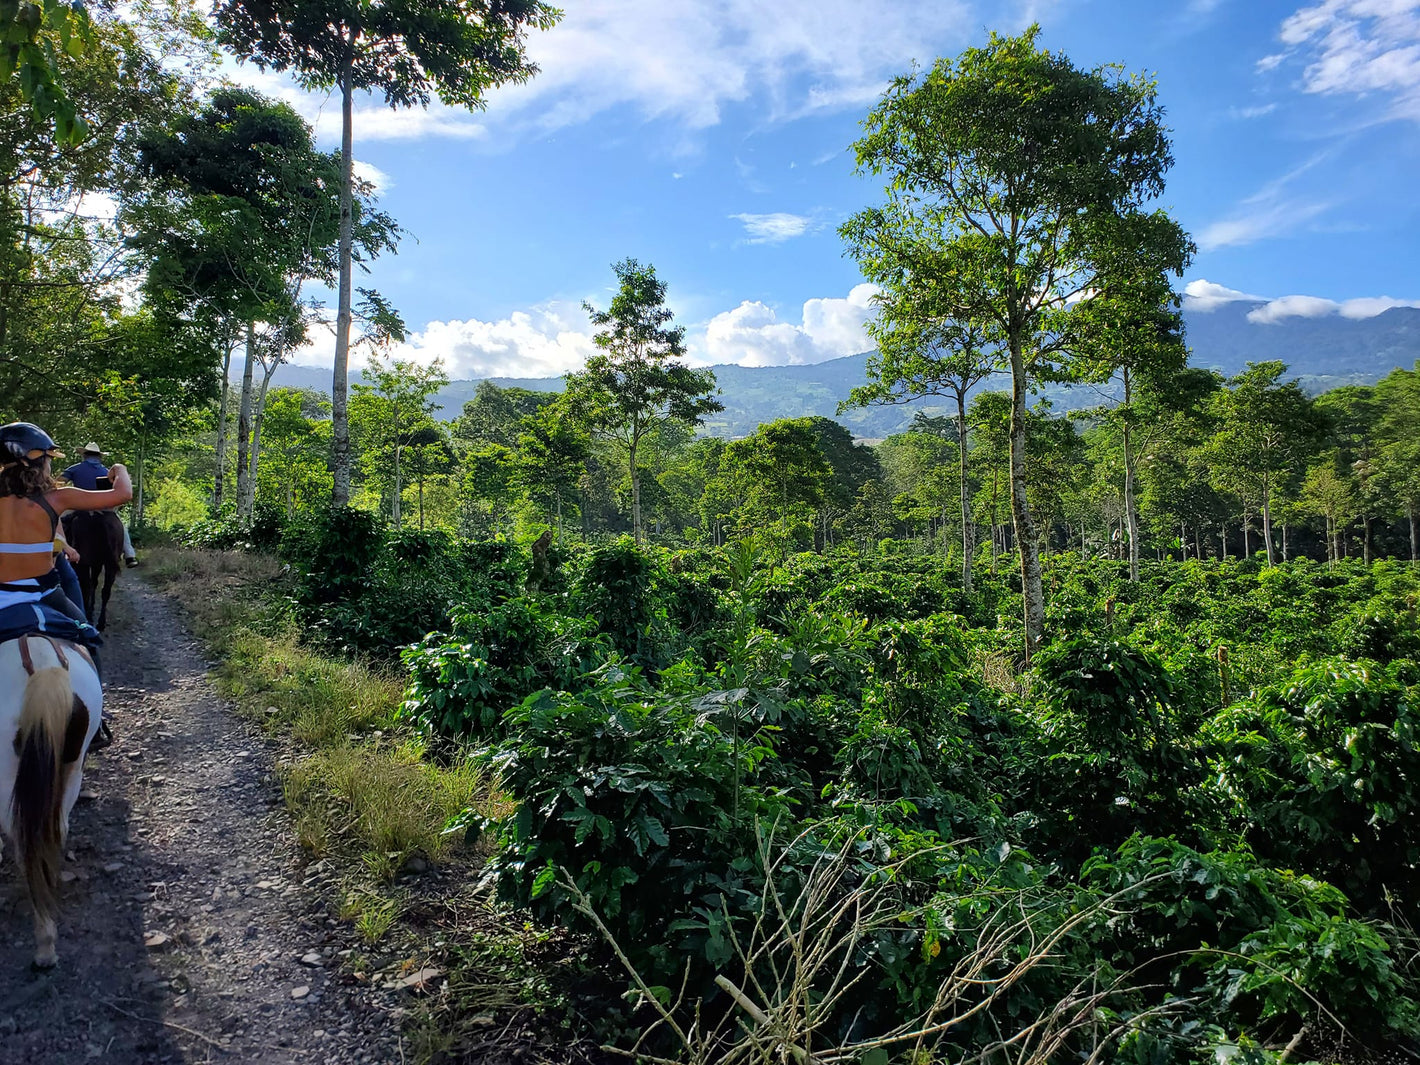 Horseback riding and forests in Cartago Province, Costa Rica